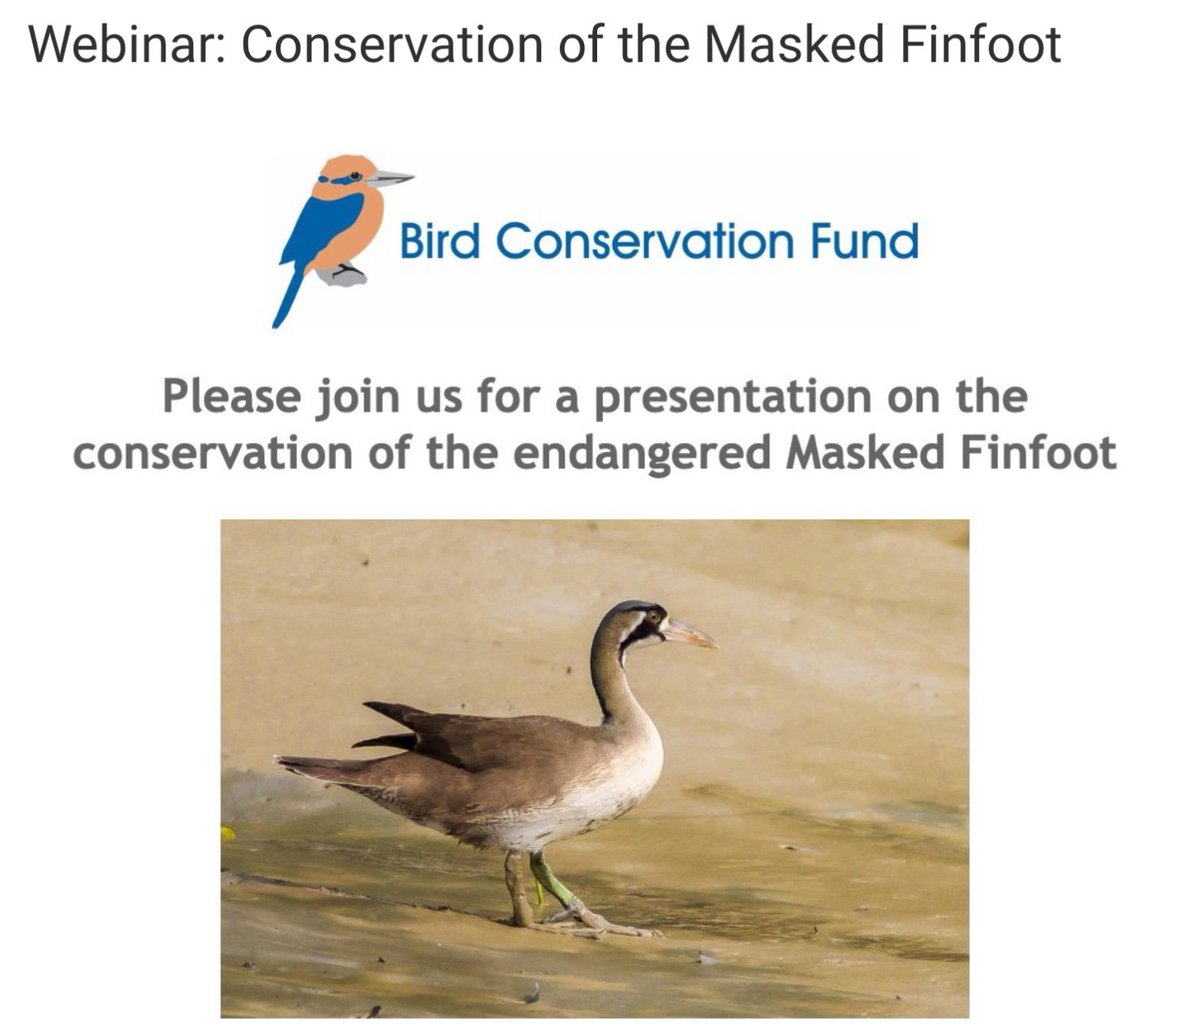 Join the webinar 🎙about #MaskedFinfoot hosted by @BirdConservationFund on 16 Jan (Tue) at 7 pm Pacific Standard Time (03:00 am GMT) via Zoom. Info for registration and support the #conservation work: t.ly/k3bq2